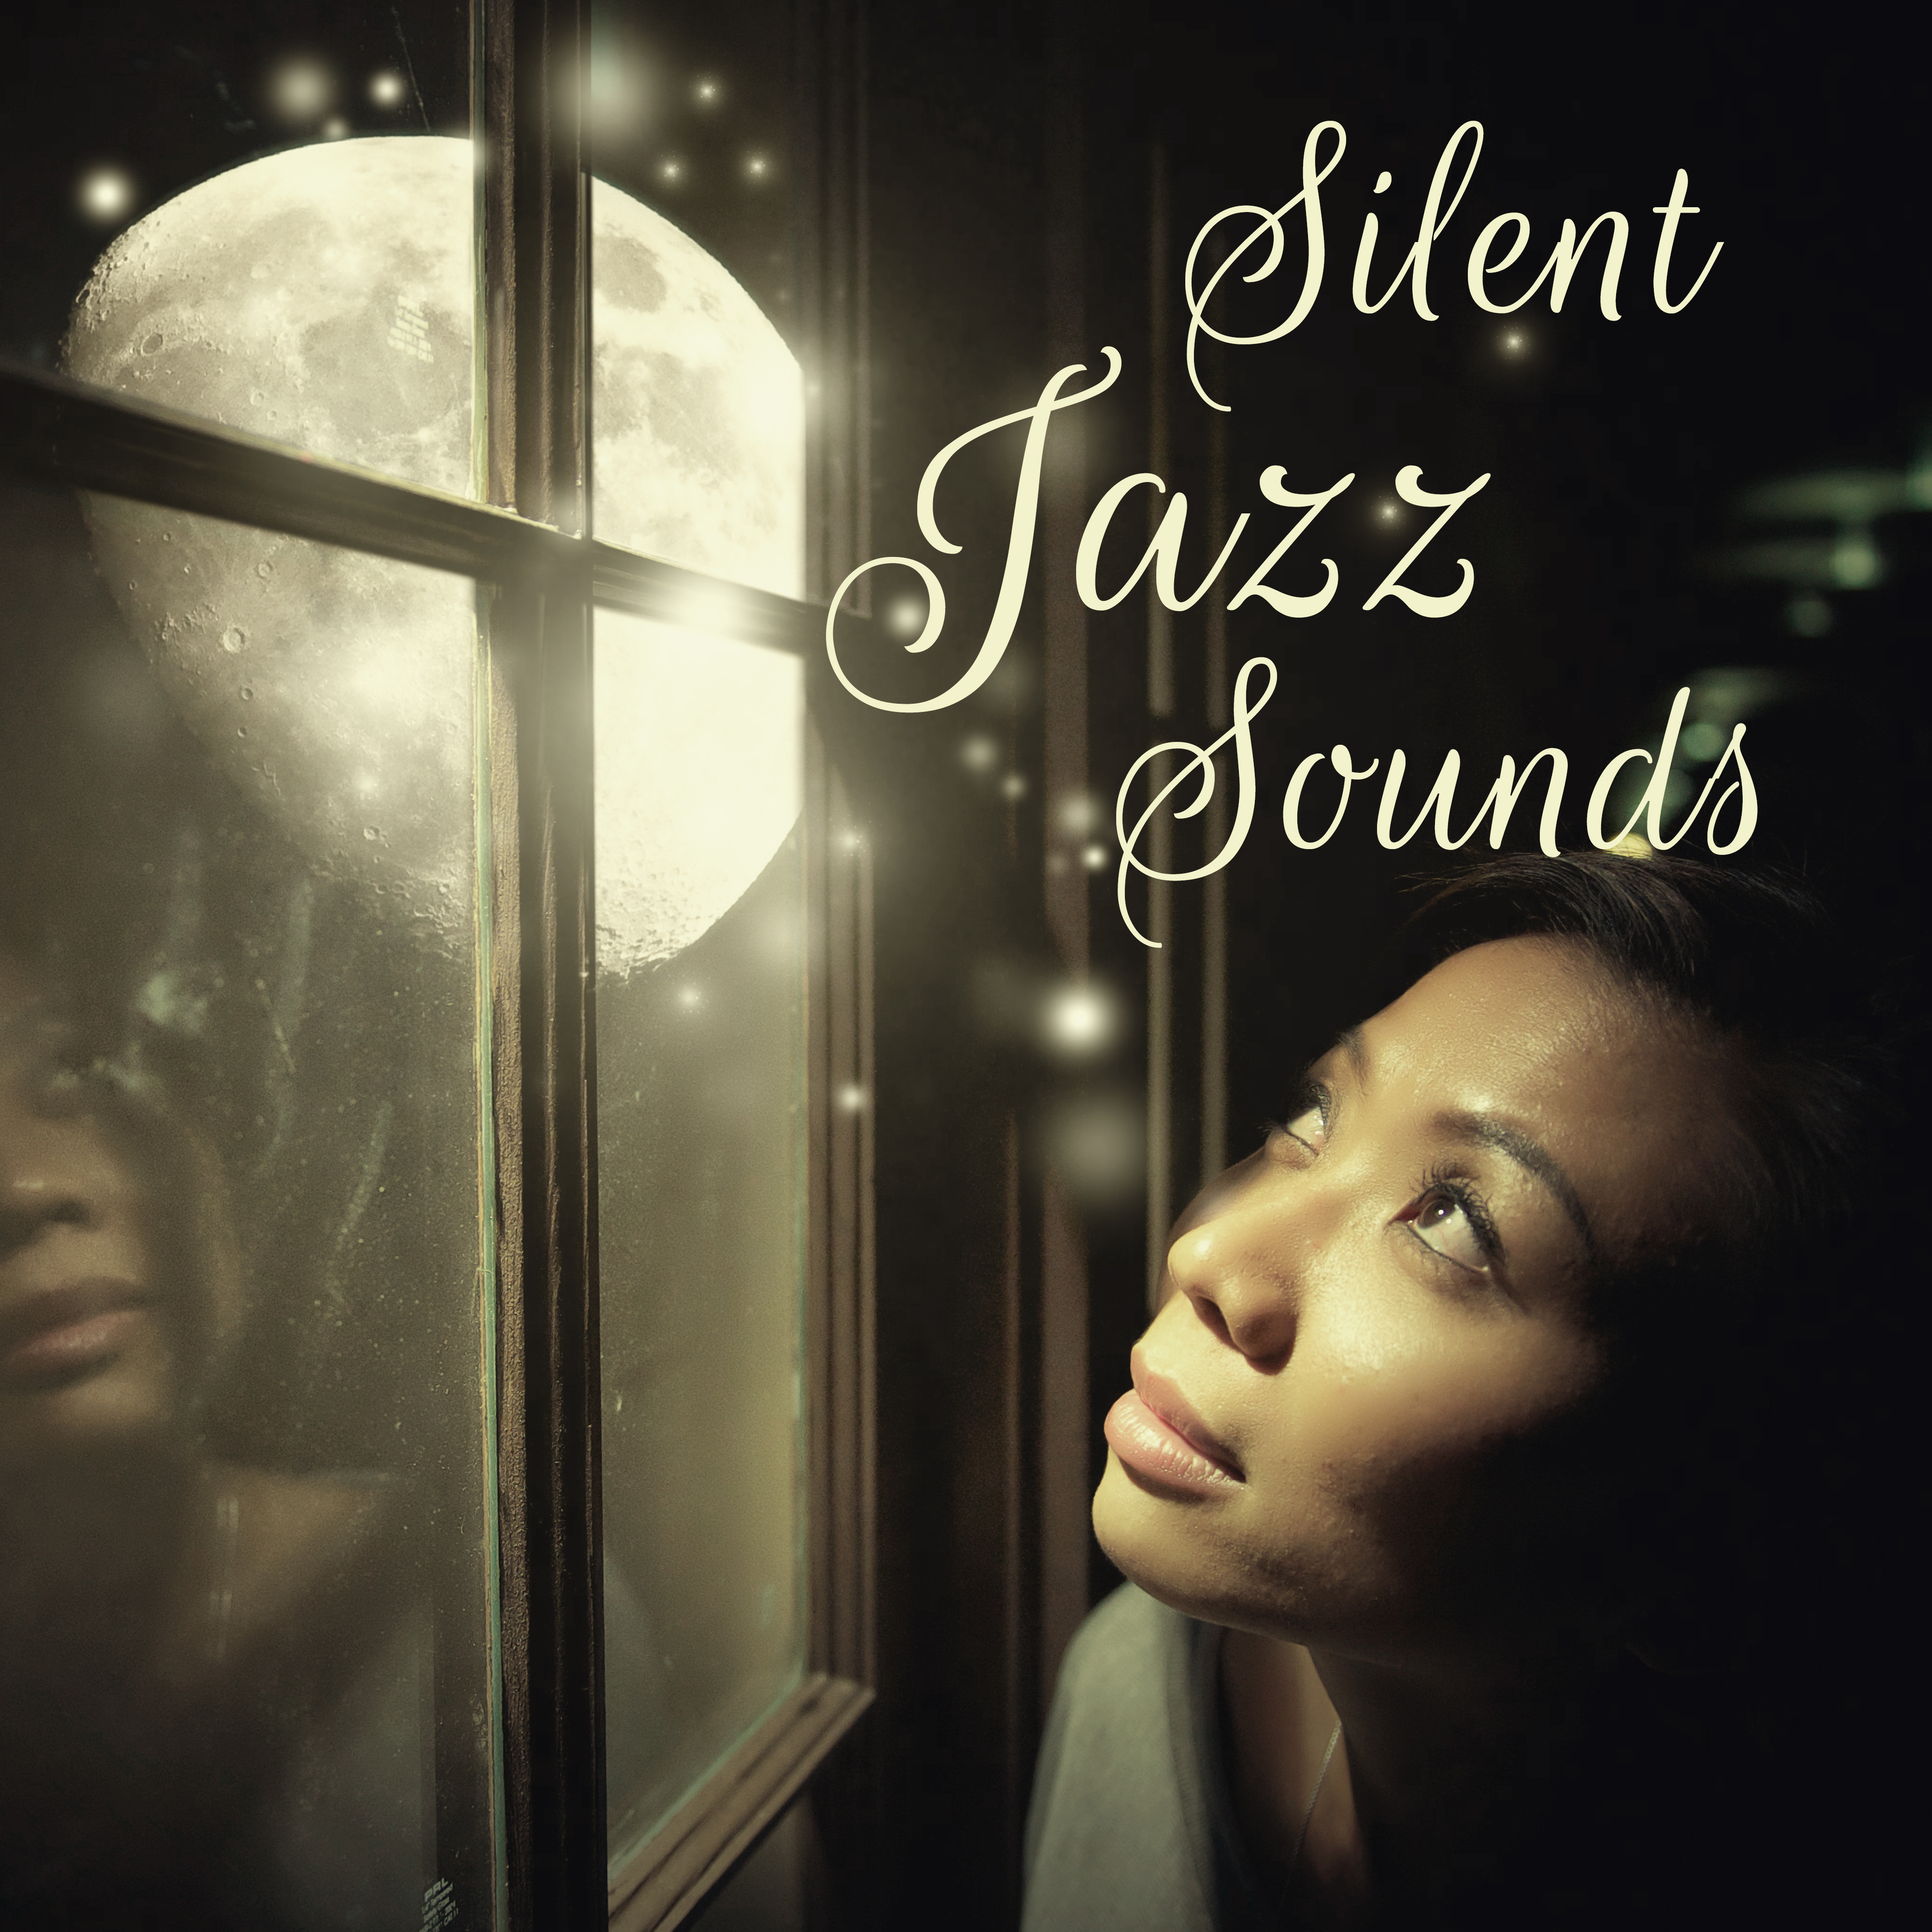 Silent Jazz Sounds – Mellow Piano Bar, Soothing Sounds, Instrumental Piano Jazz, Piano Lounge, Relaxing Night